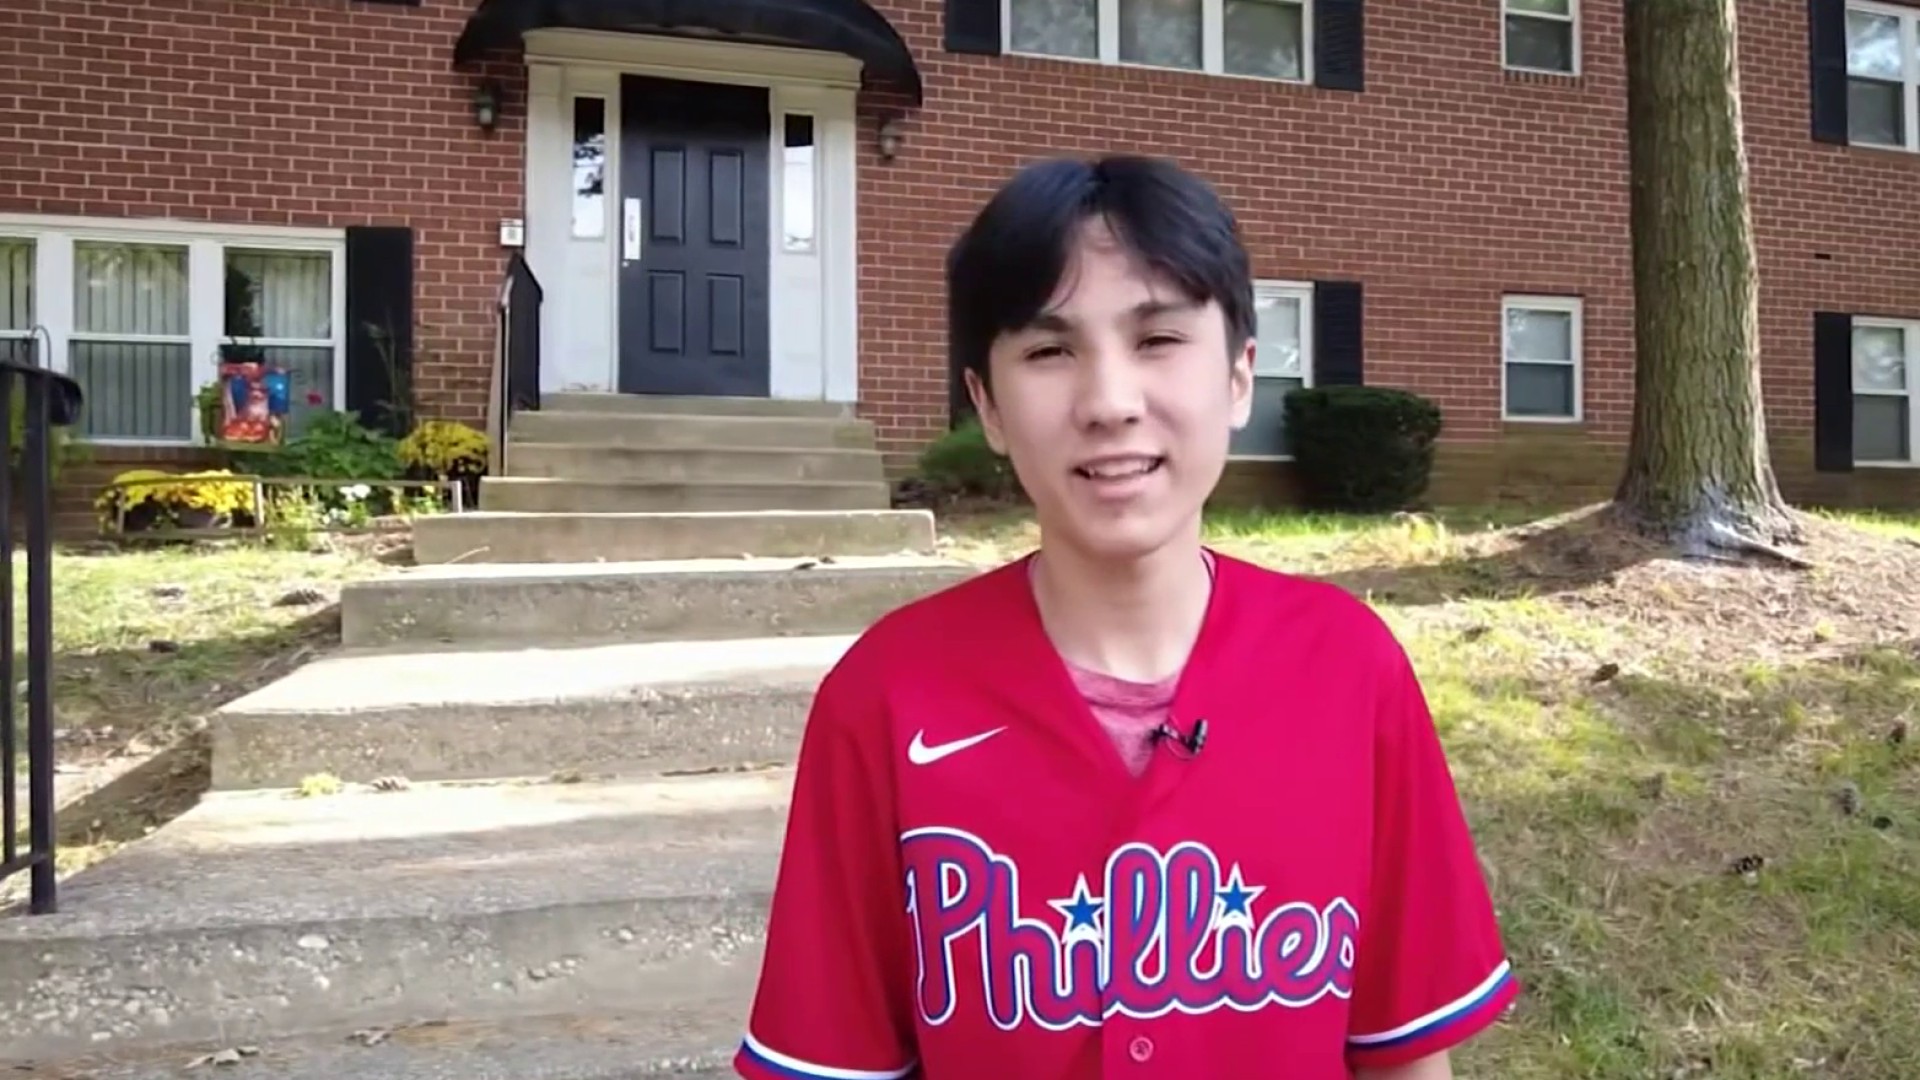 Phillies Fans Take 16-Year-Old Boy Under Their Wing After